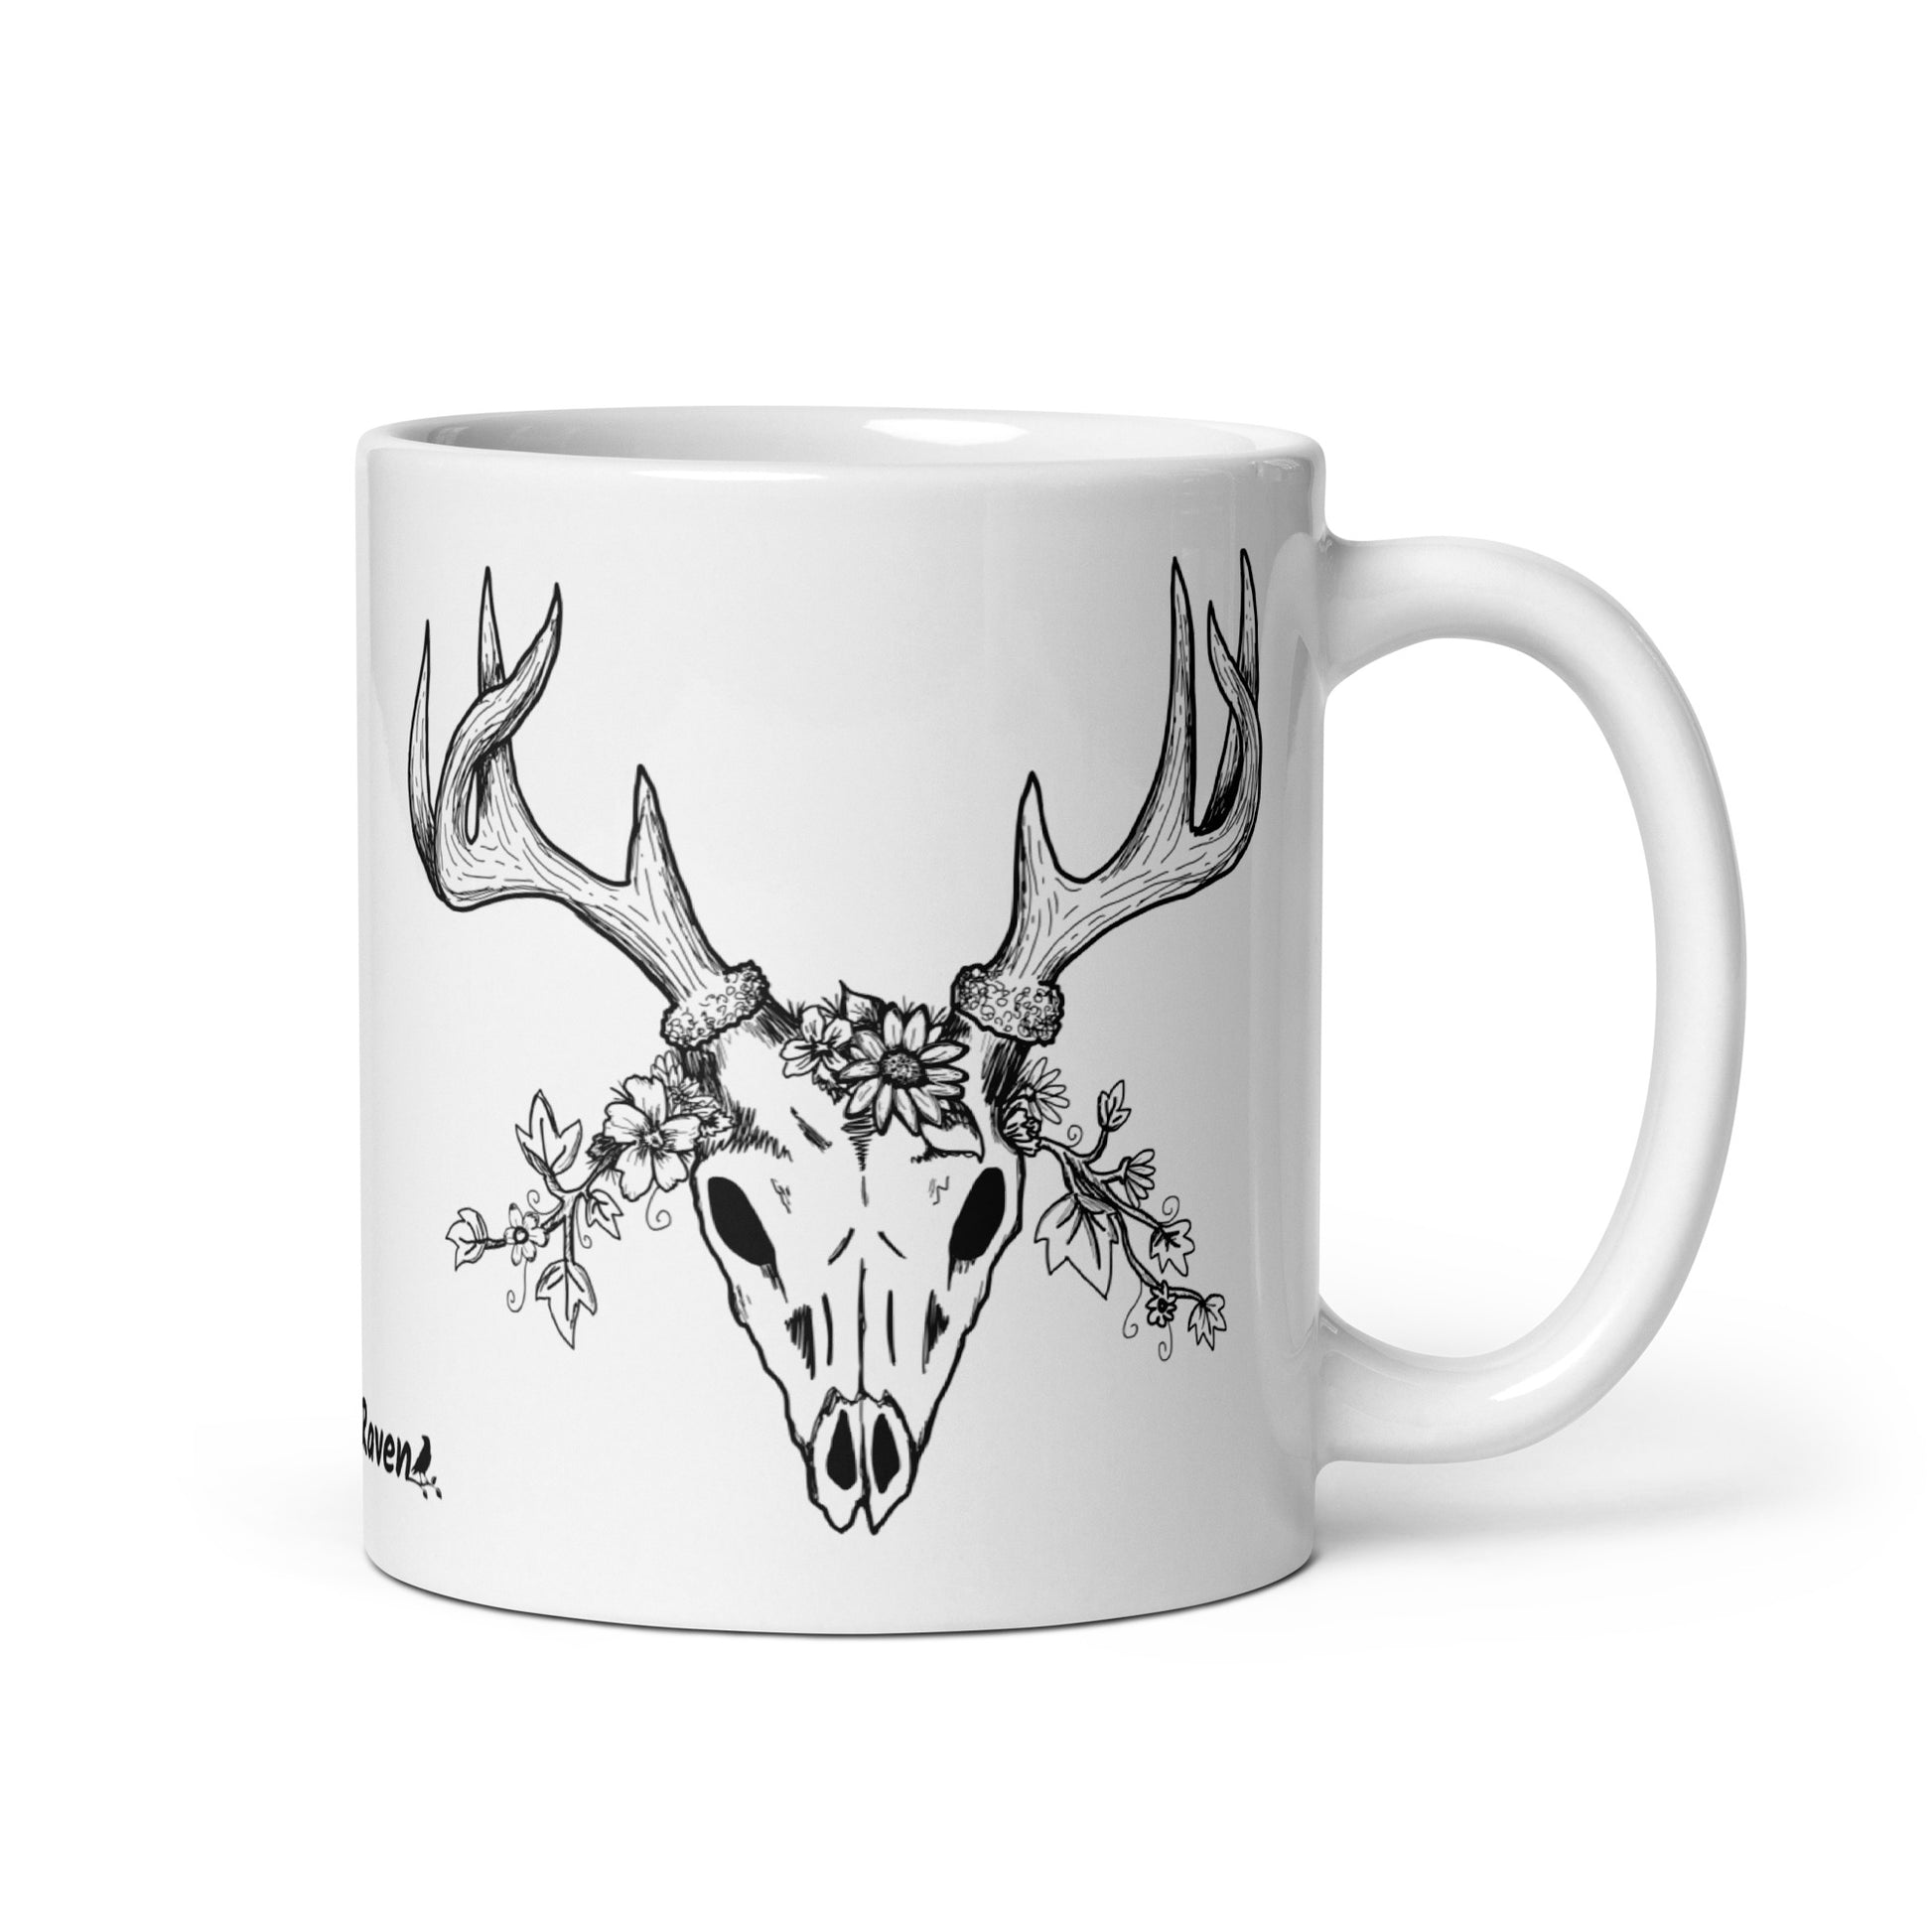 11 oz white ceramic mug. Features a double-sided hand illustrated image of a deer skull wreathed in flowers.